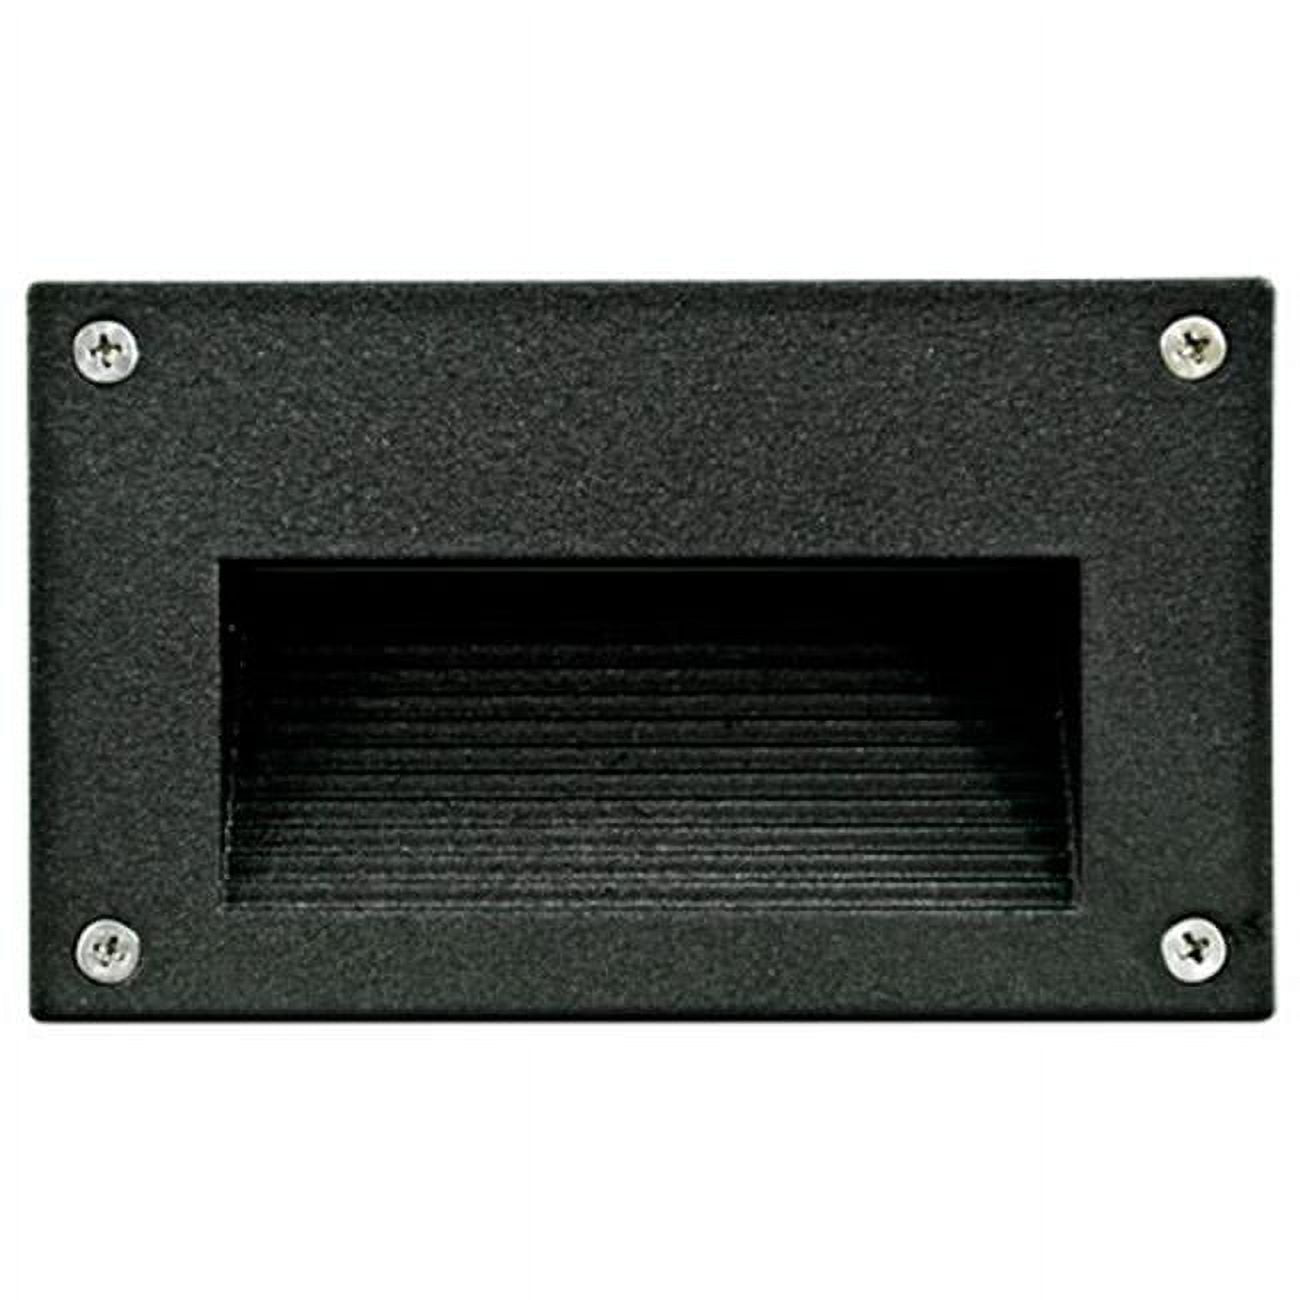 Picture of Dabmar Lighting LV655-B Cast Aluminum Recessed Hooded Brick, Step & Wall Light, Black - 3.88 x 6.44 x 2.63 in.